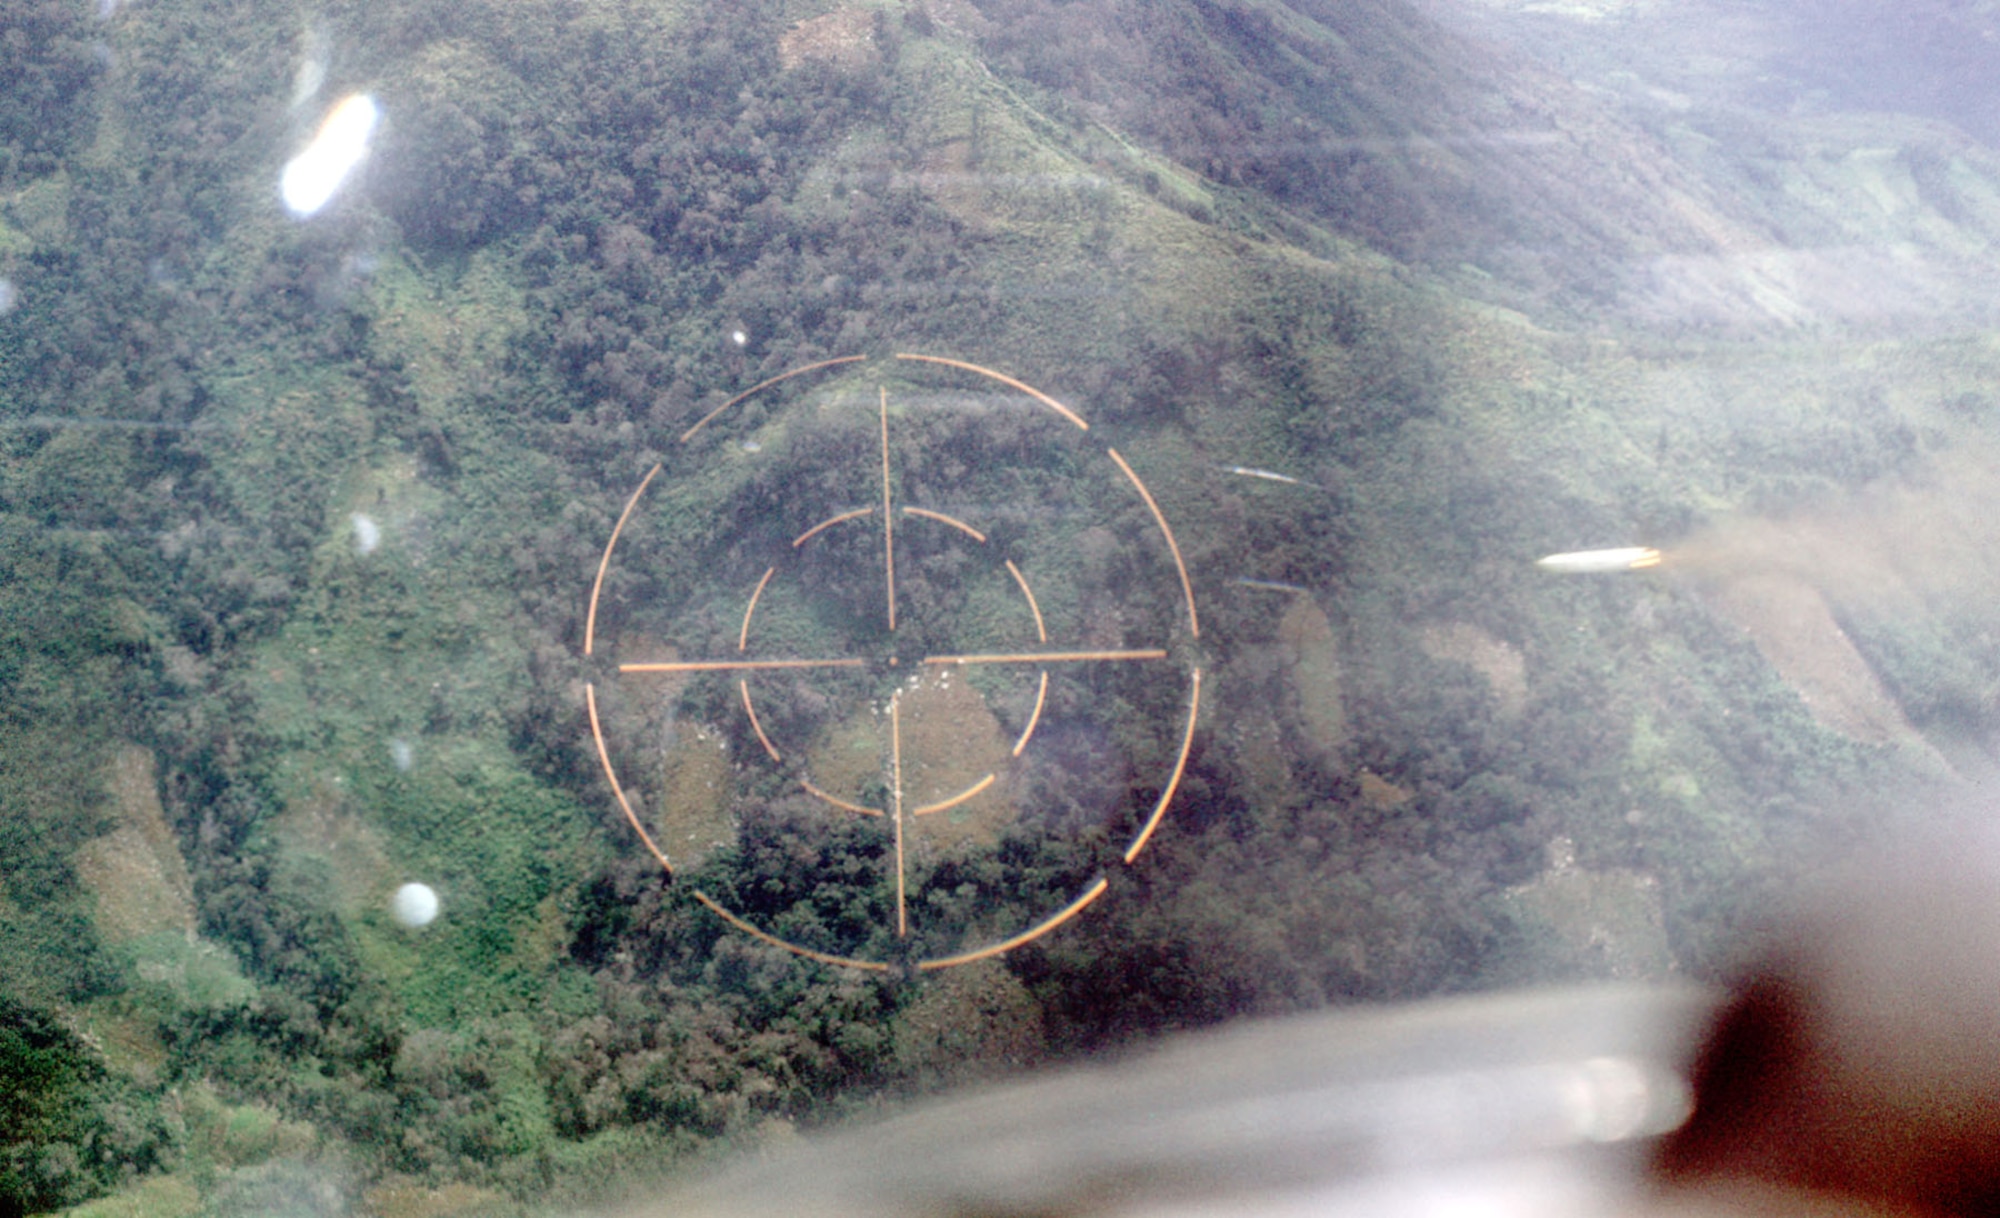 After identifying a target, the FAC called for attack aircraft and marked the target.  Here, an O-2 FAC fires a white phosphorus rocket (just to the right of the gunsight’s crosshairs) near Phan Rang in 1969. (U.S. Air Force photo)